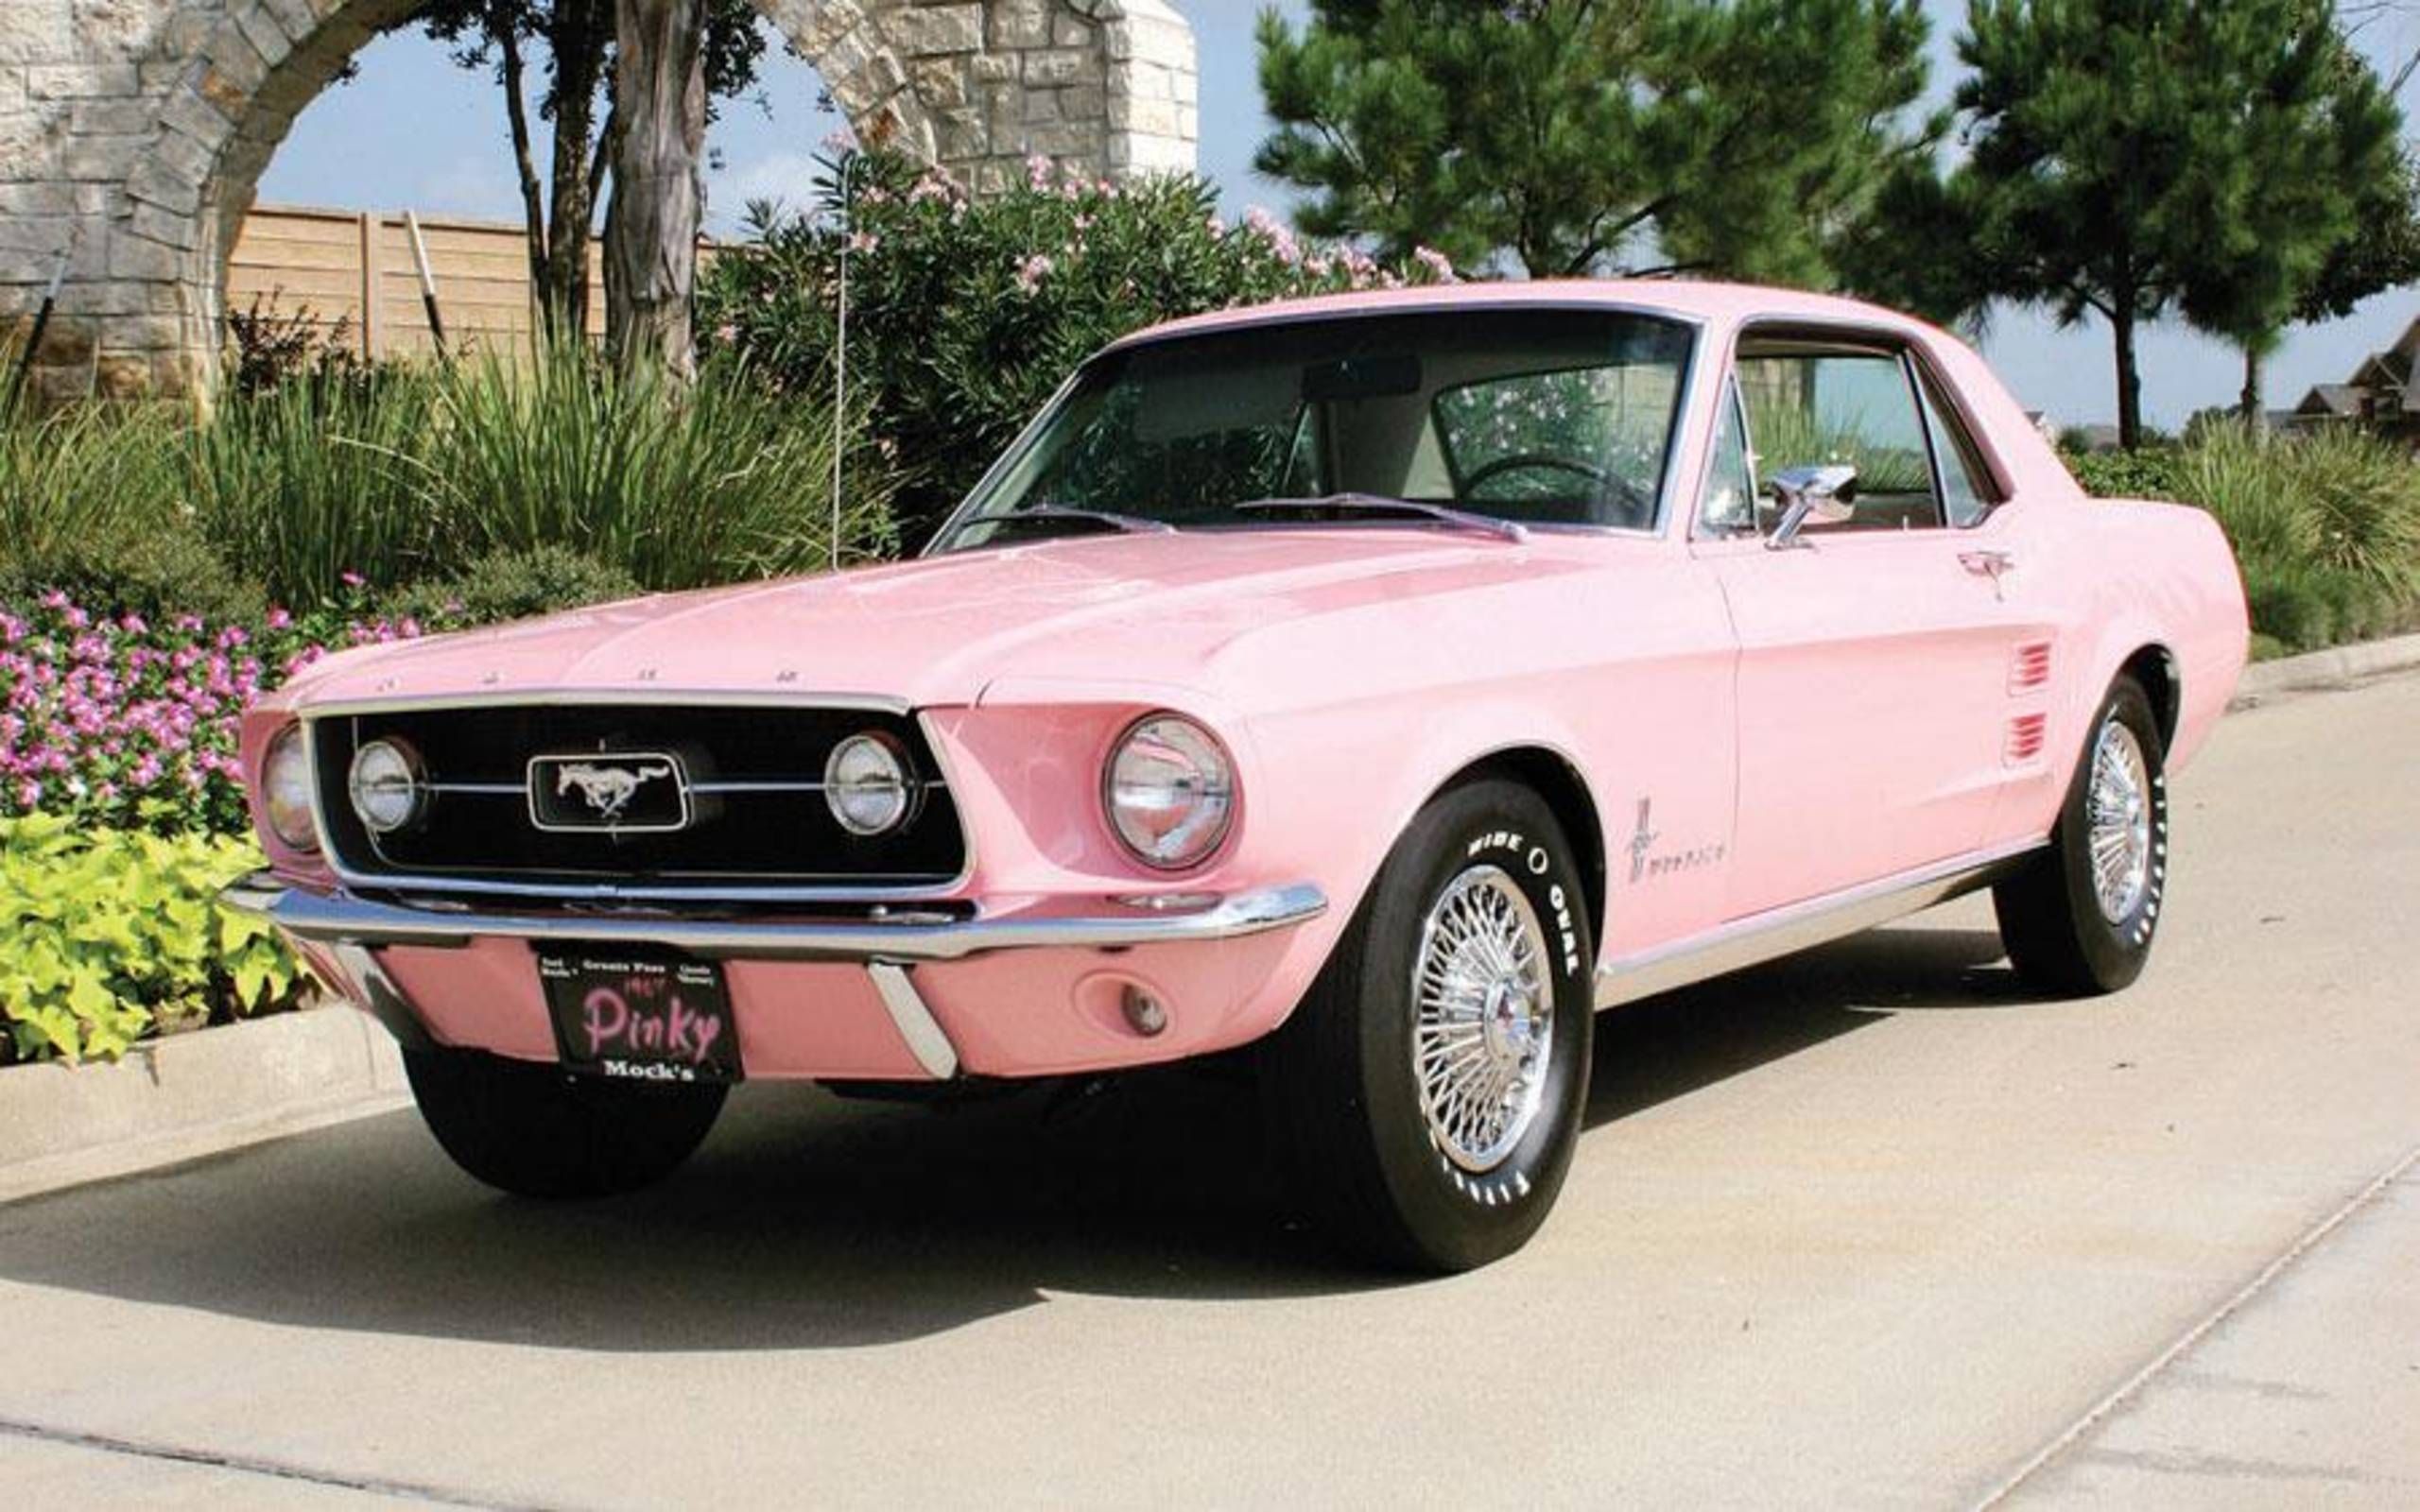 1967 Playboy Pink Ford Mustang 390: Real men drive pink